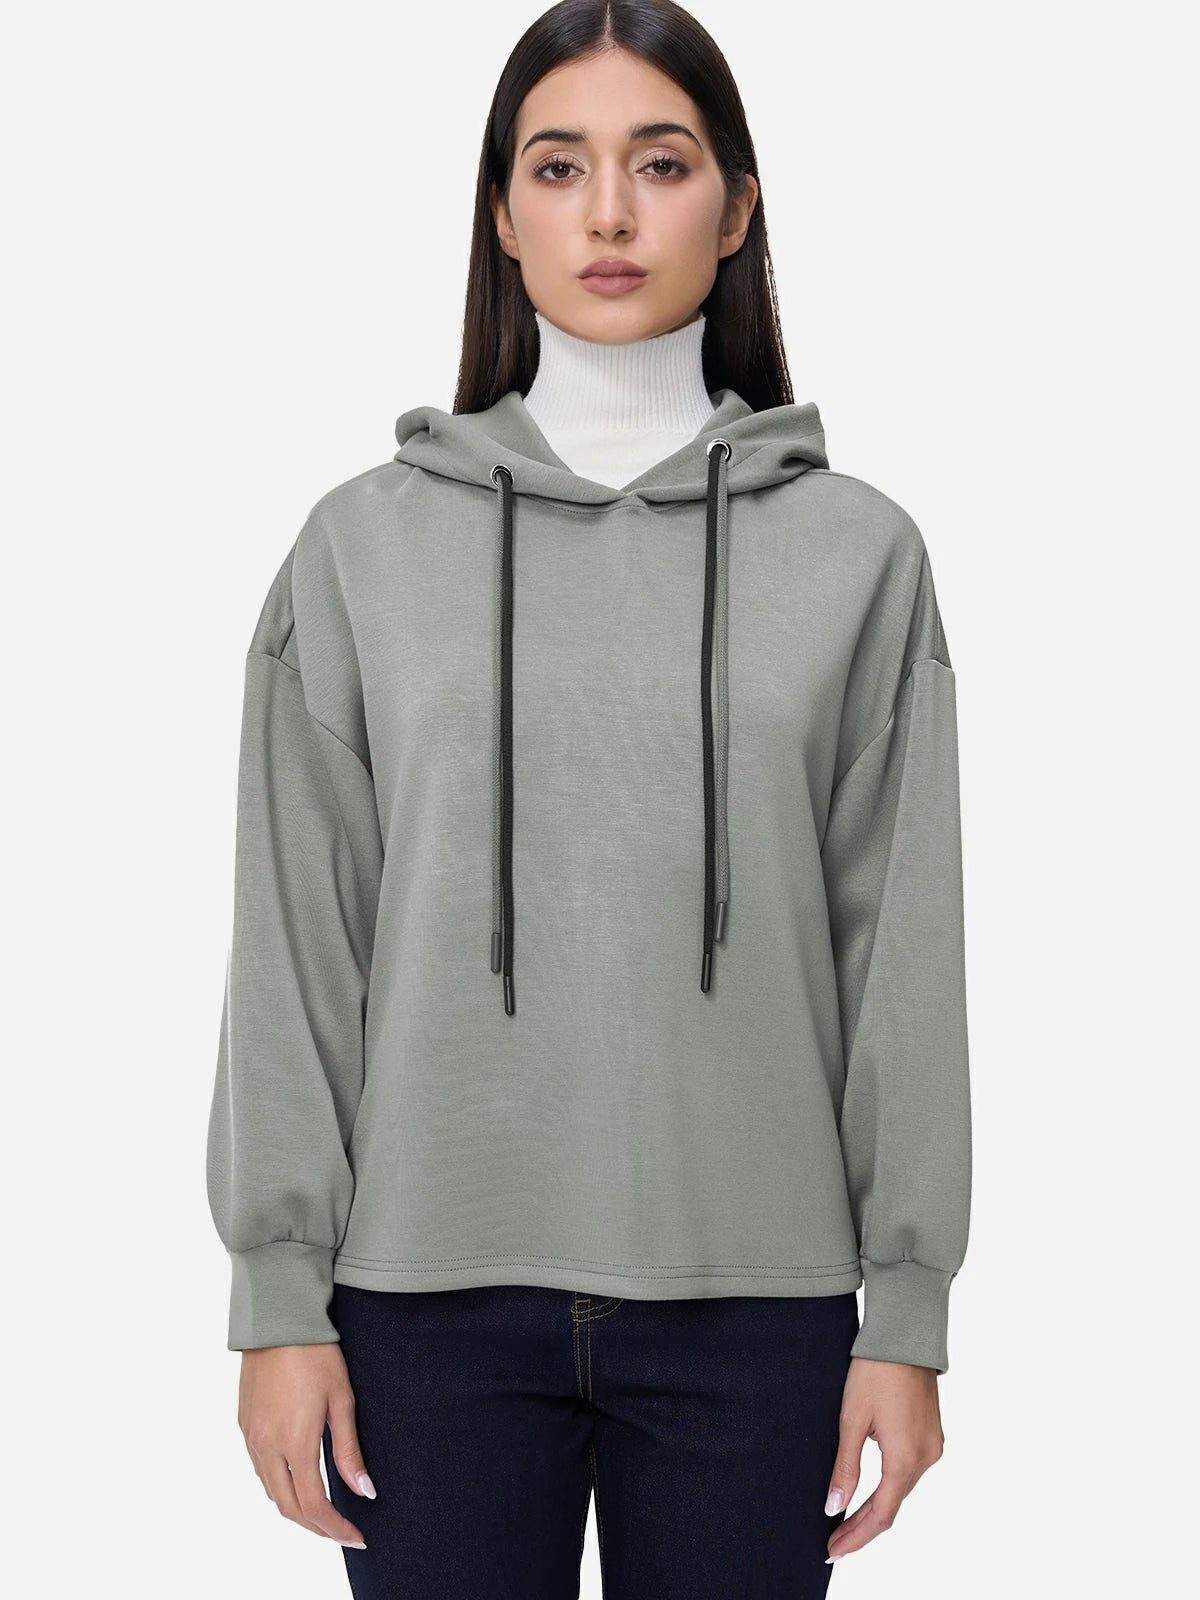 Versatile Fashion: Stylish Grey Hoodie with a Relaxed Fit